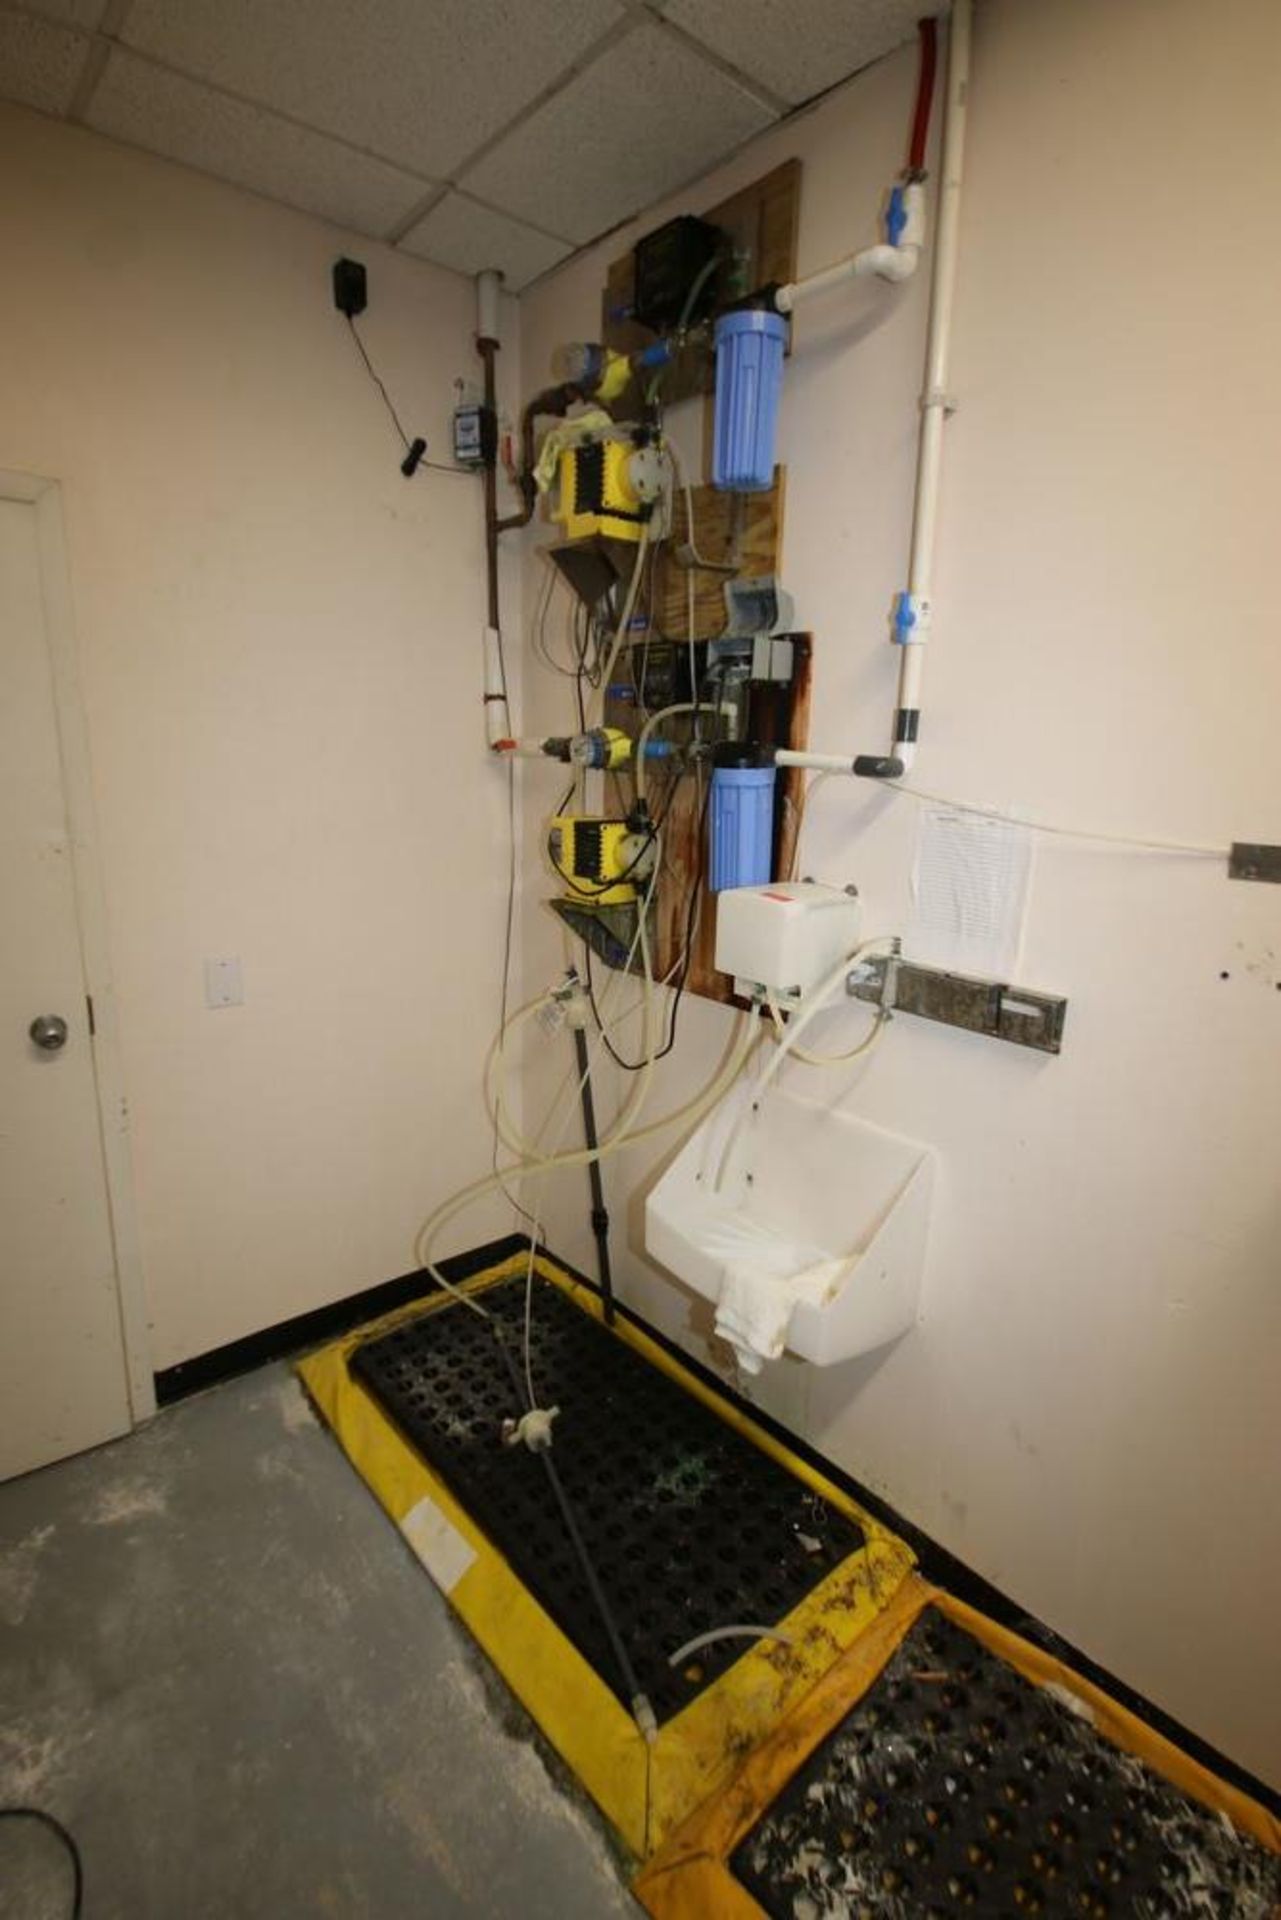 Contents of Room, Includes Chemical Containment Area with (4) Containment Matts, and Associated Wall - Image 3 of 4